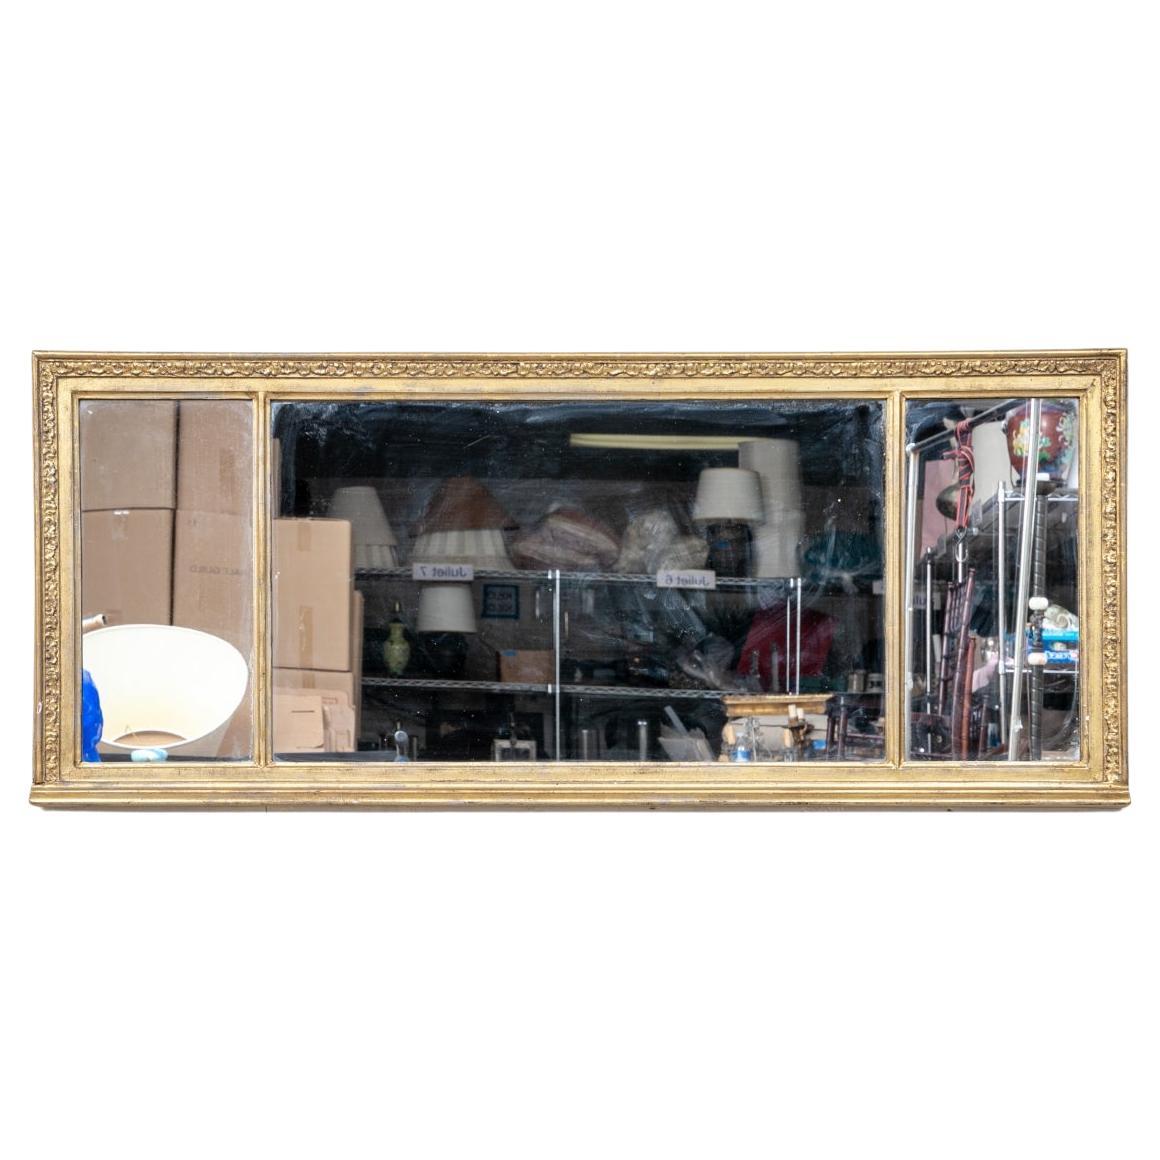 A fine Antique Gilt and Carved Mirror in the Federal style. The tripartite mirror with carved cornice over a fine thin leafy surround band on the sides and bottom. The wire on verso for hanging shows the top cornice at the bottom as reflected in the